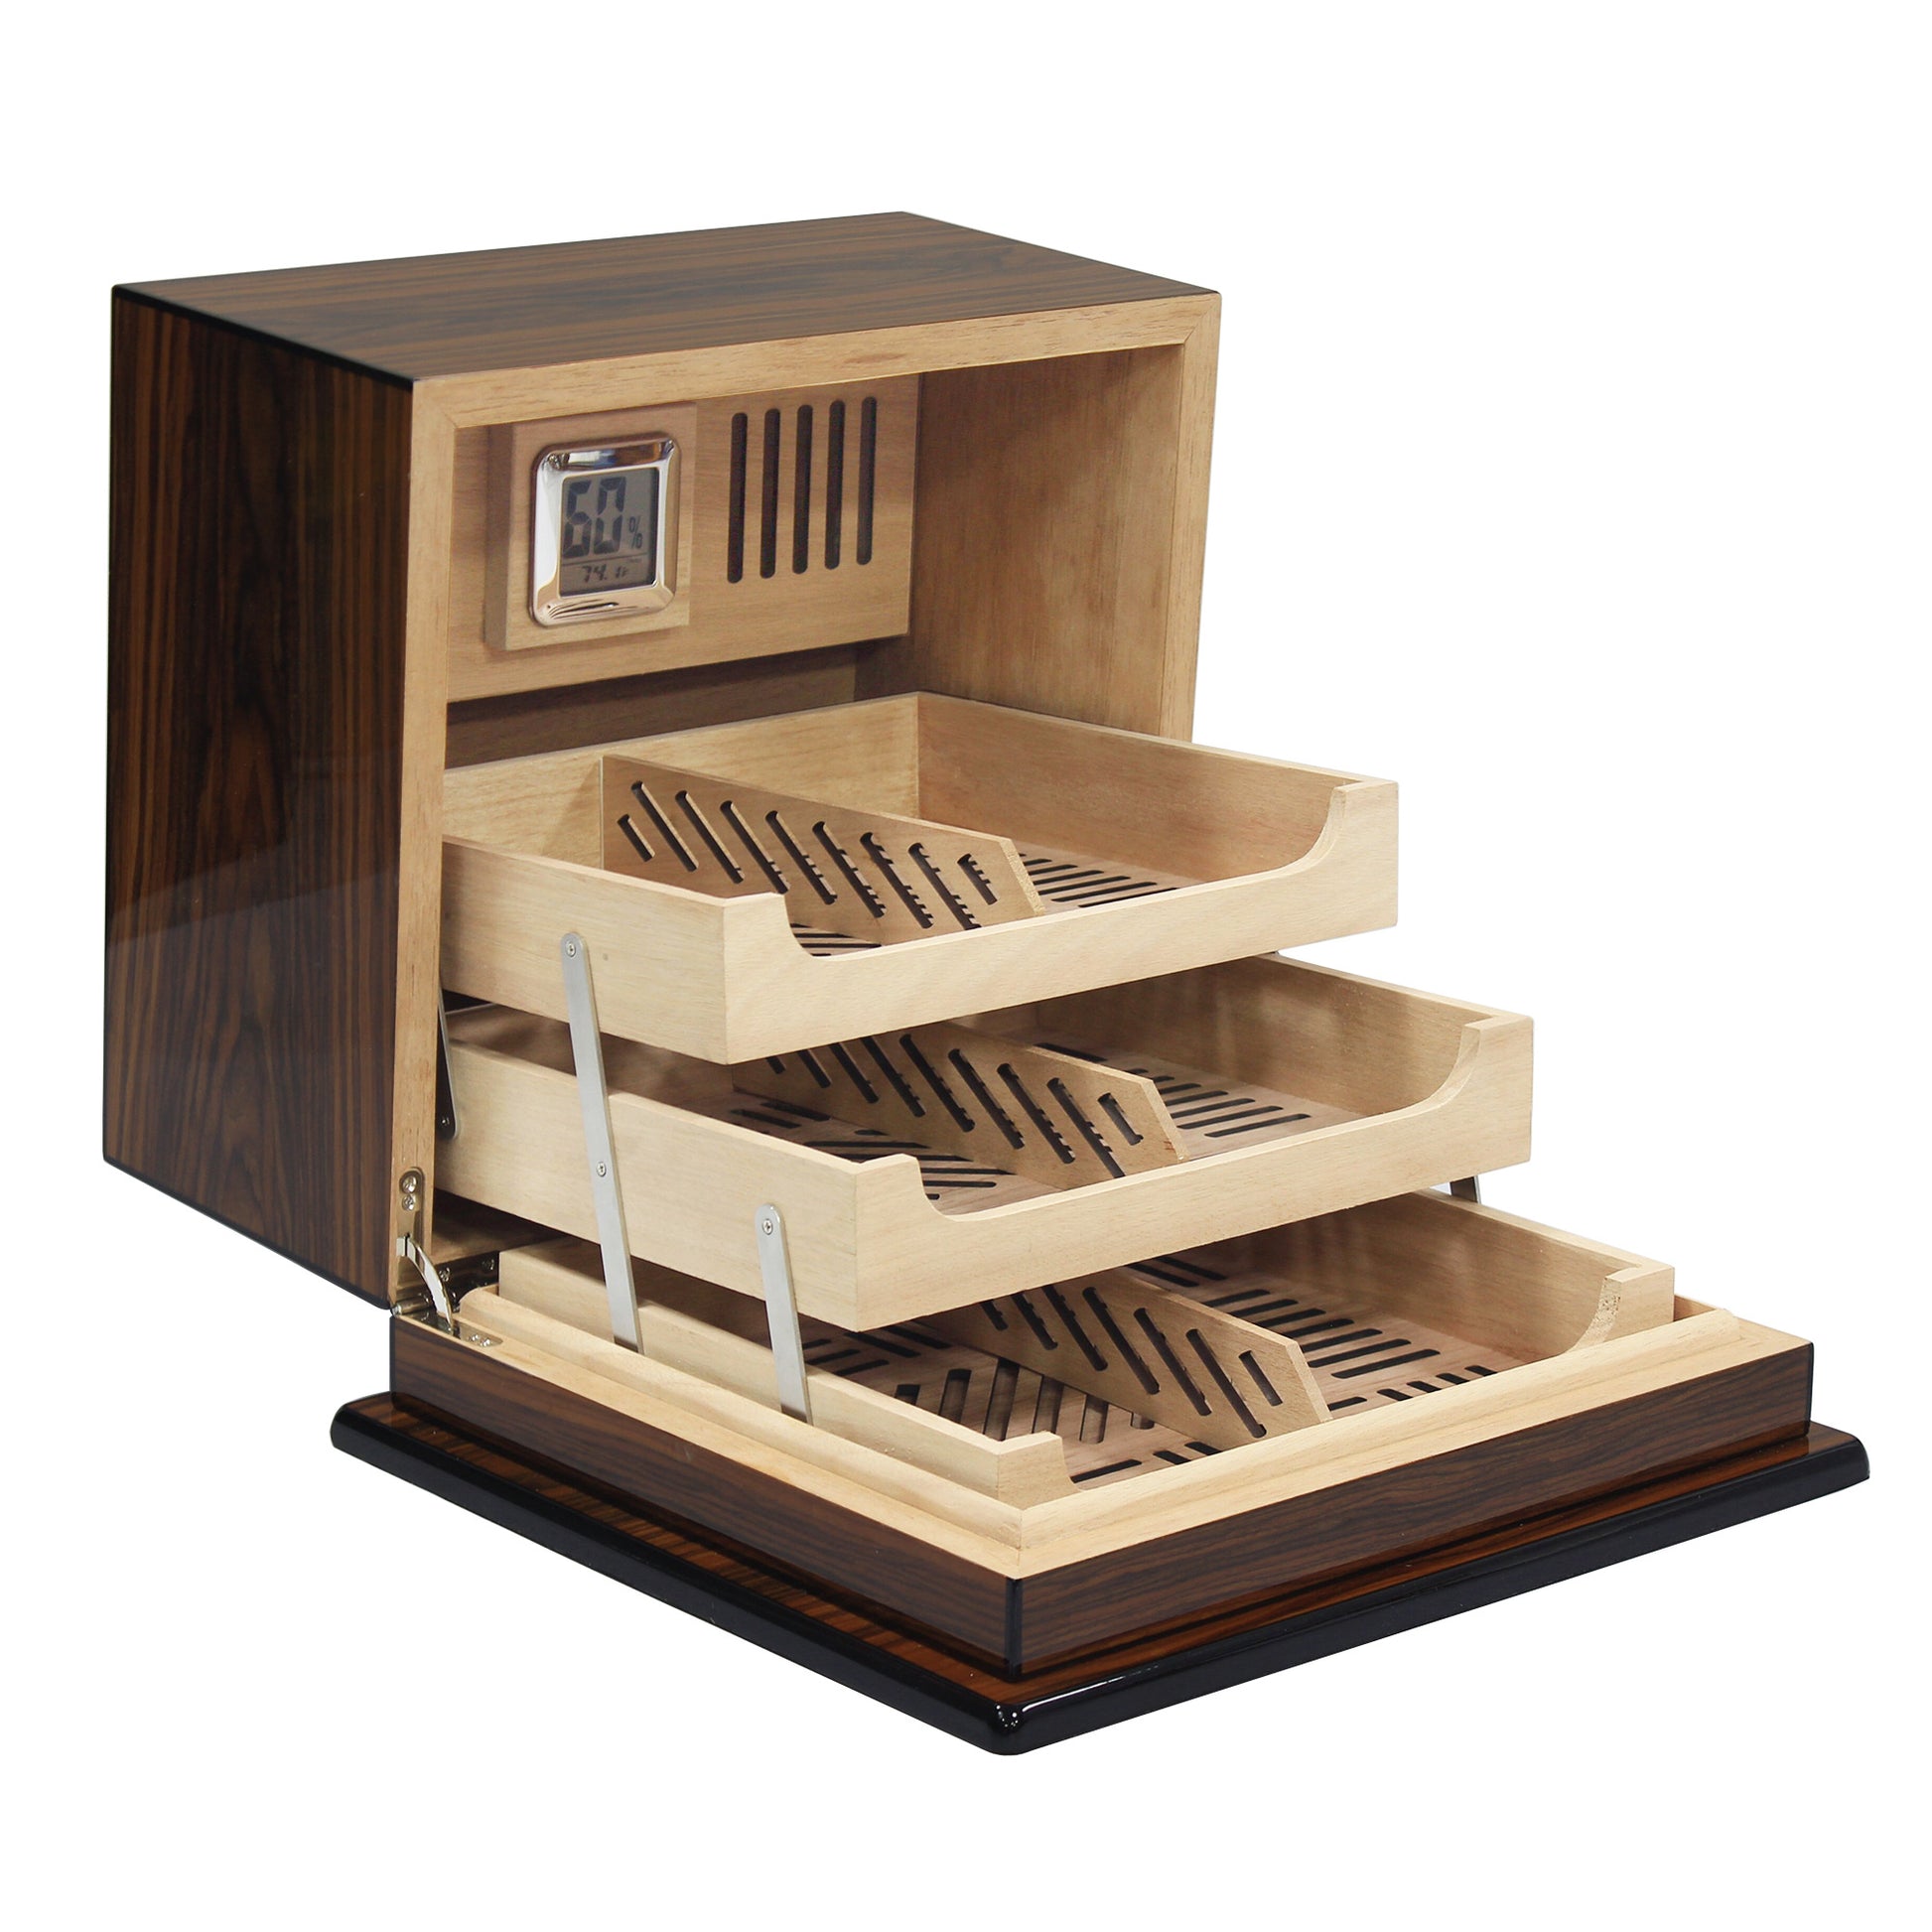 The Elevate Humidor.